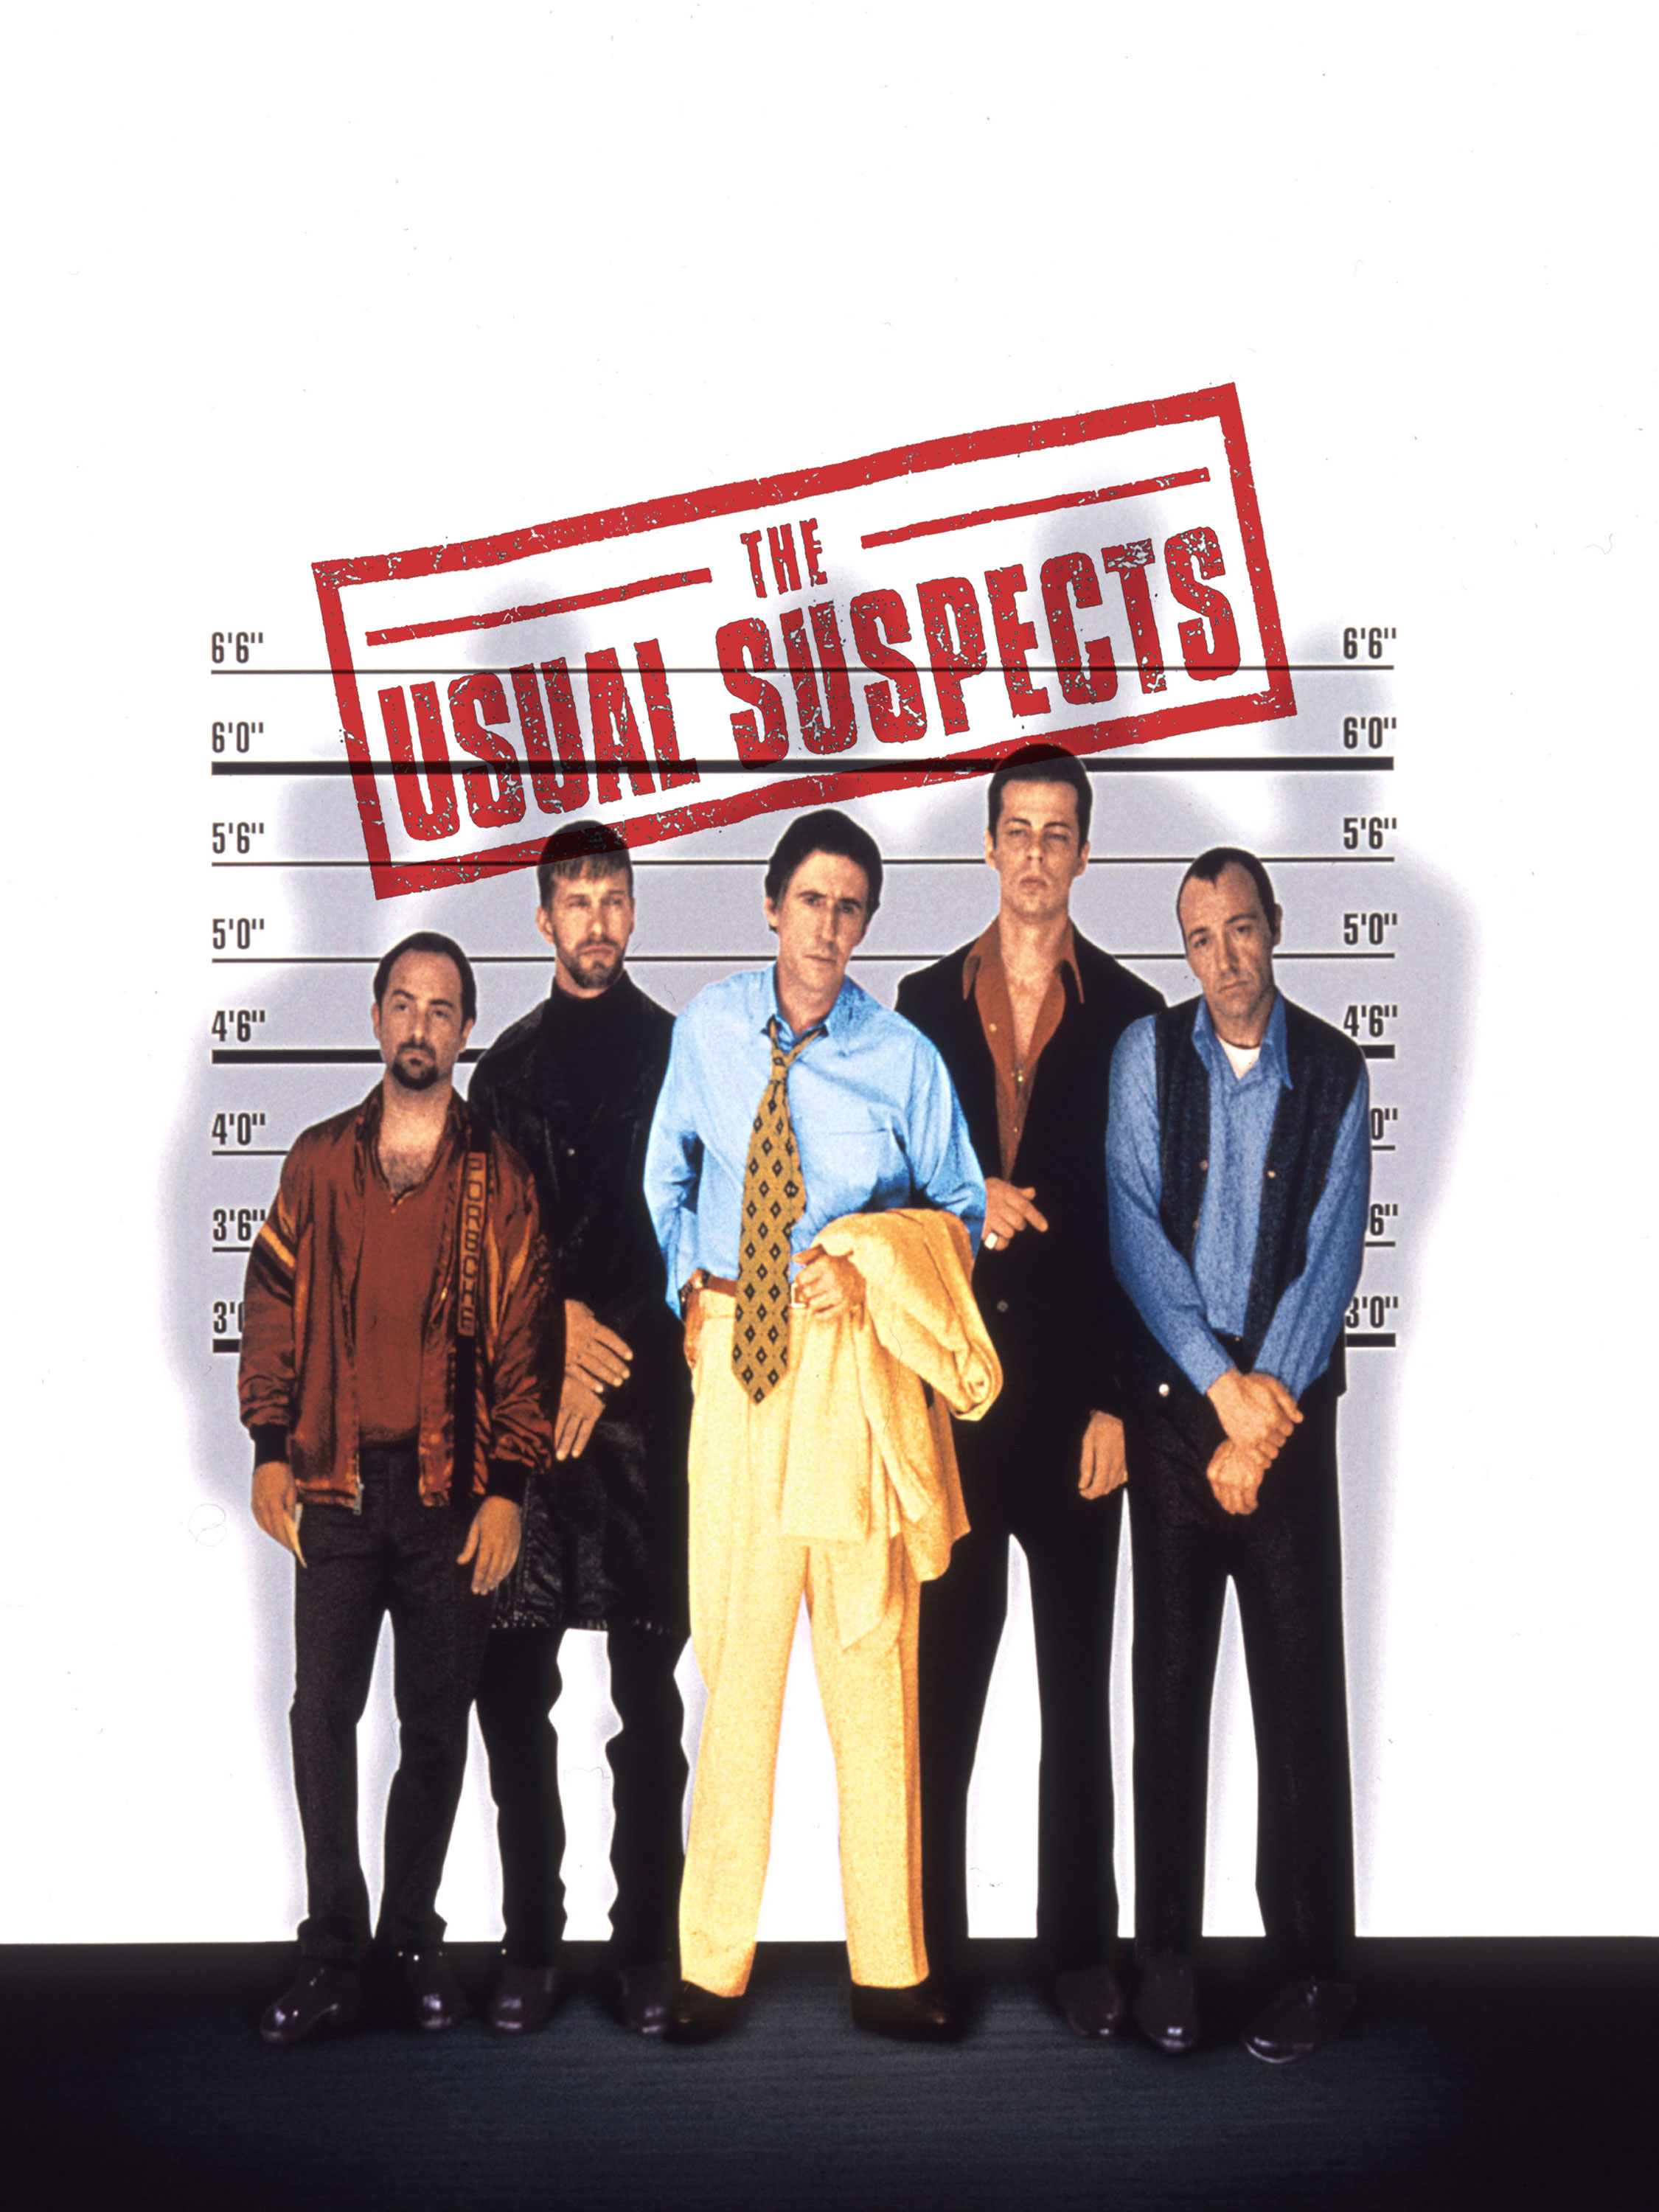 The Ambiguous Ending of The Usual Suspects…